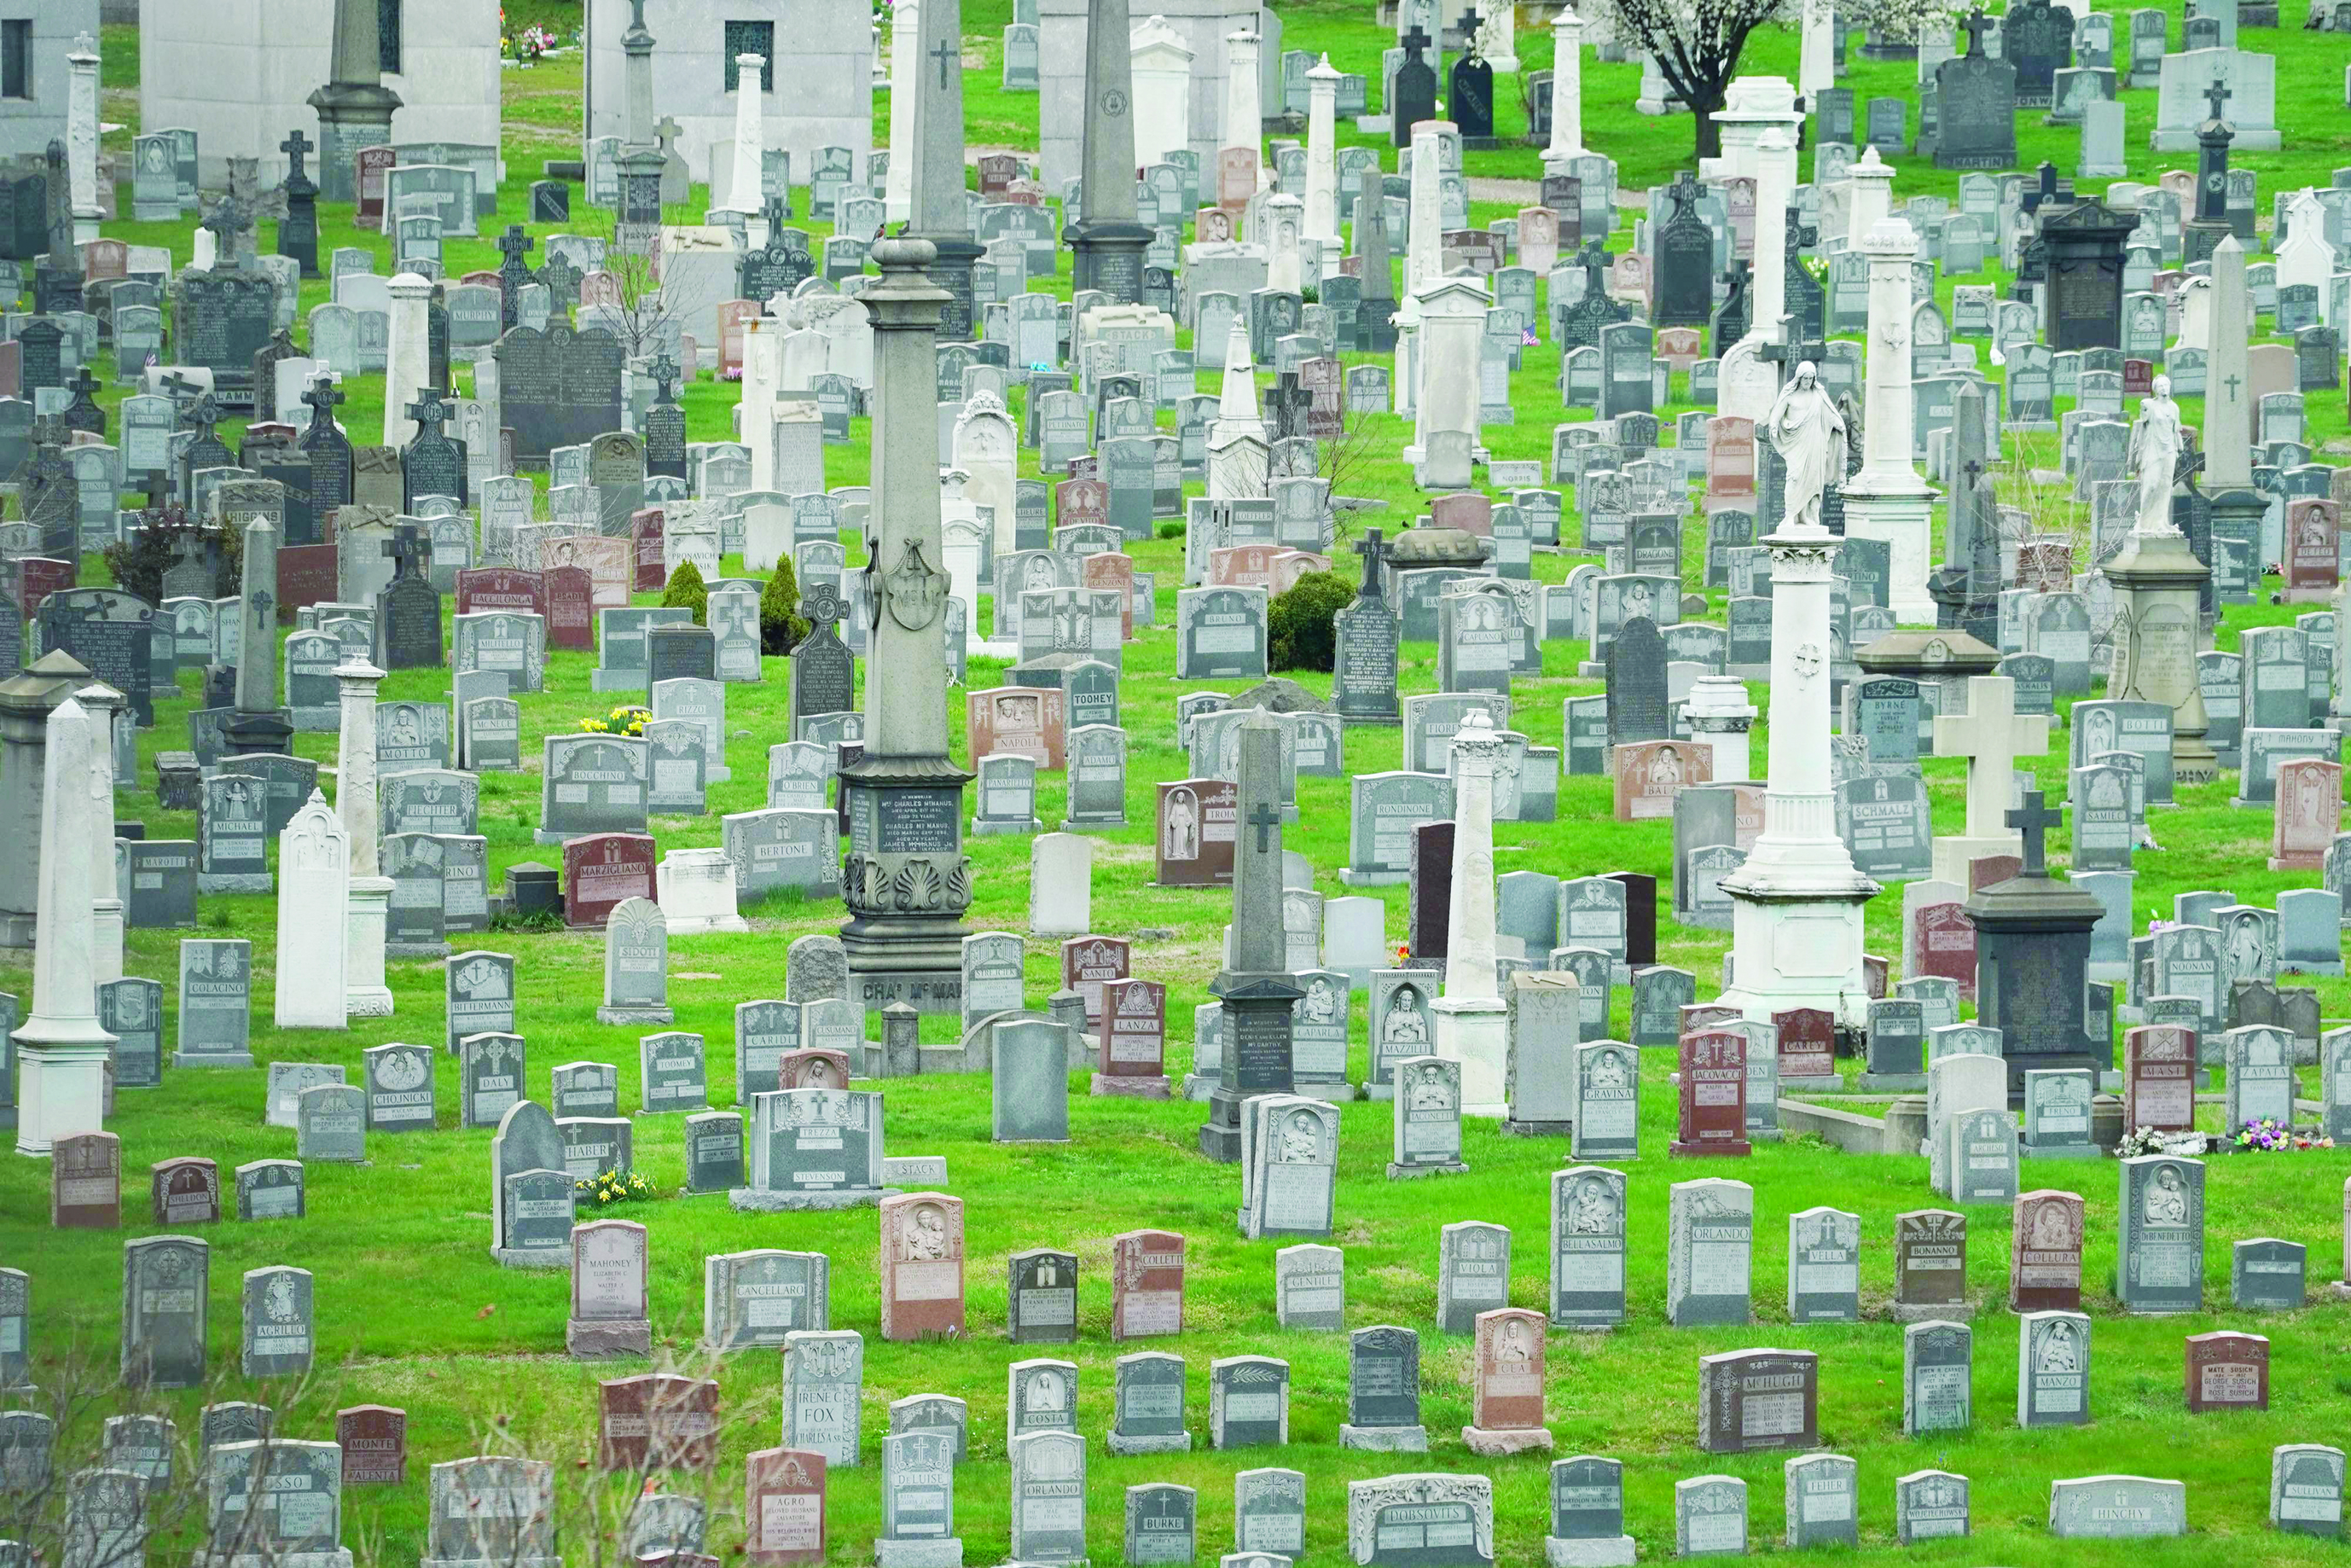 TOPSHOT - Headstones in Calvary Cemetery in the Borough of Queens on March 31, 2020 in New York. - A military hospital ship arrived in New York on March 30, 2020 as America's coronavirus epicenter prepares to fight the peak of the pandemic that has killed over 2,500 people across the US. The navy's 1,000-bed USNS Comfort entered a Manhattan pier around 10:45 am (1545 GMT). It will treat non-virus-related patients, helping to ease the burden of hospitals overwhelmed by the crisis. (Photo by Bryan R. Smith / AFP)